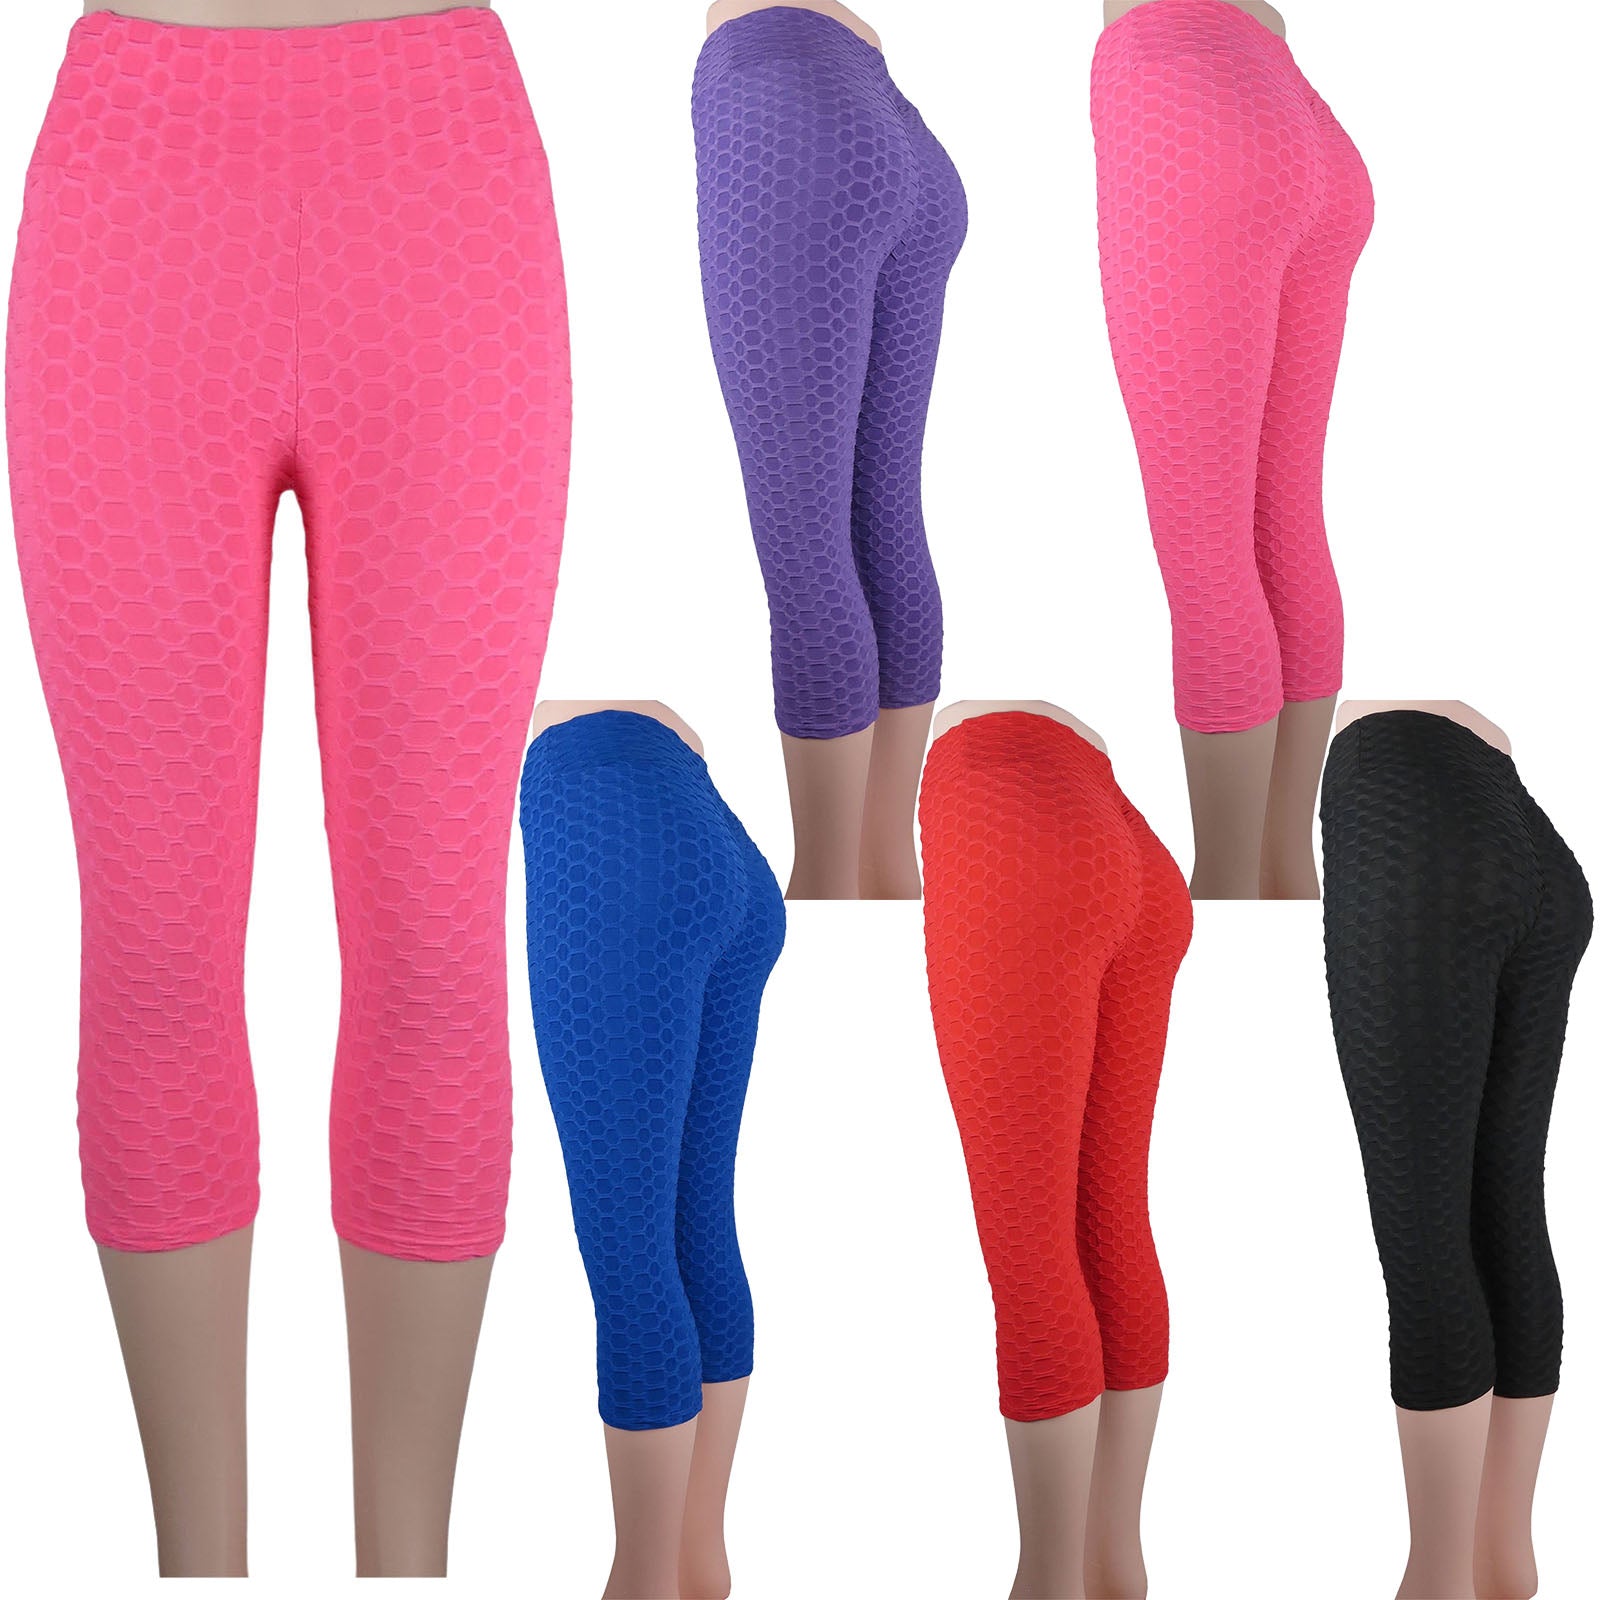 24 Wholesale Womens Capri Pants In Assorted Solid Colors - at